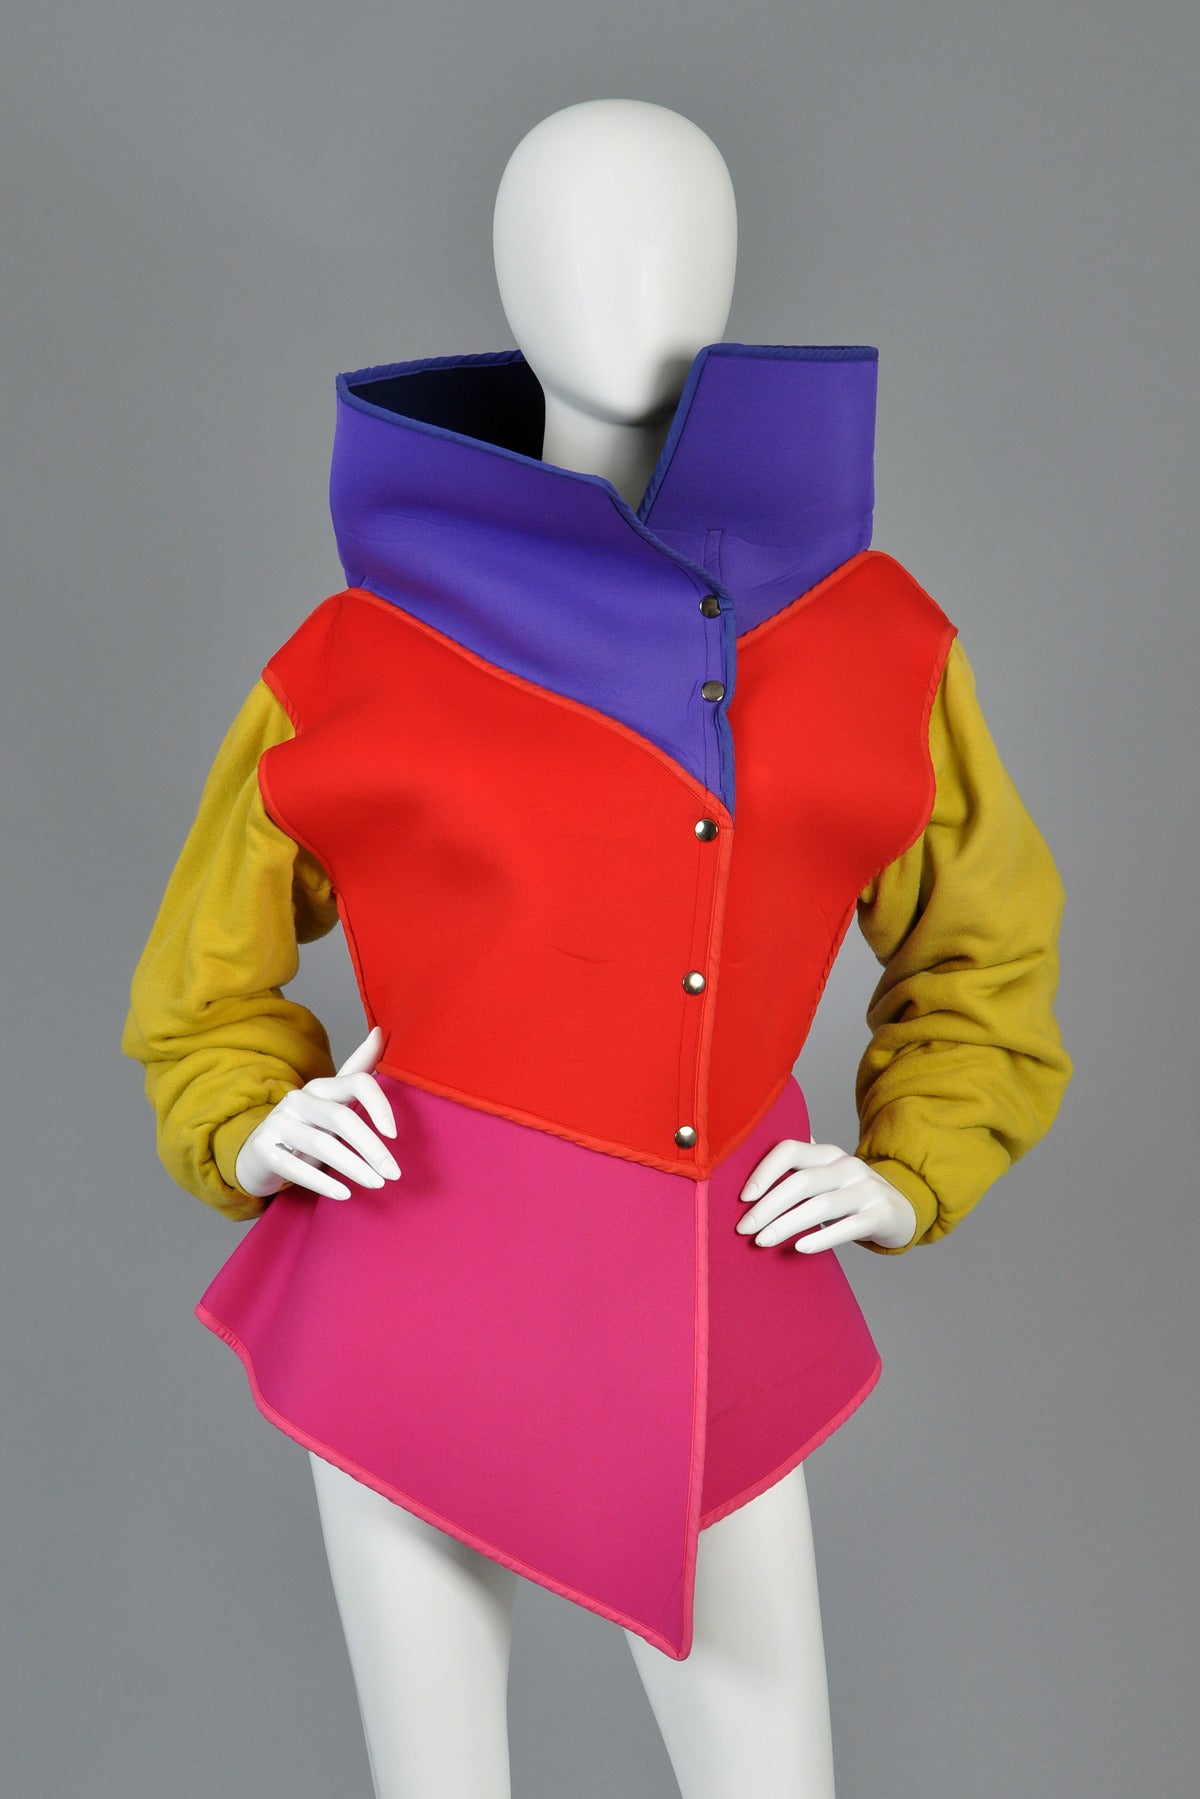 Seriously awesome circa F/W 83/84 Kansai Yamamoto neoprene and cotton jacket. Such an amazing find! Kansai items are nearly impossible to find and we couldn't believe it when we came across this little gem! 

Fun jewel toned color blocked neoprene